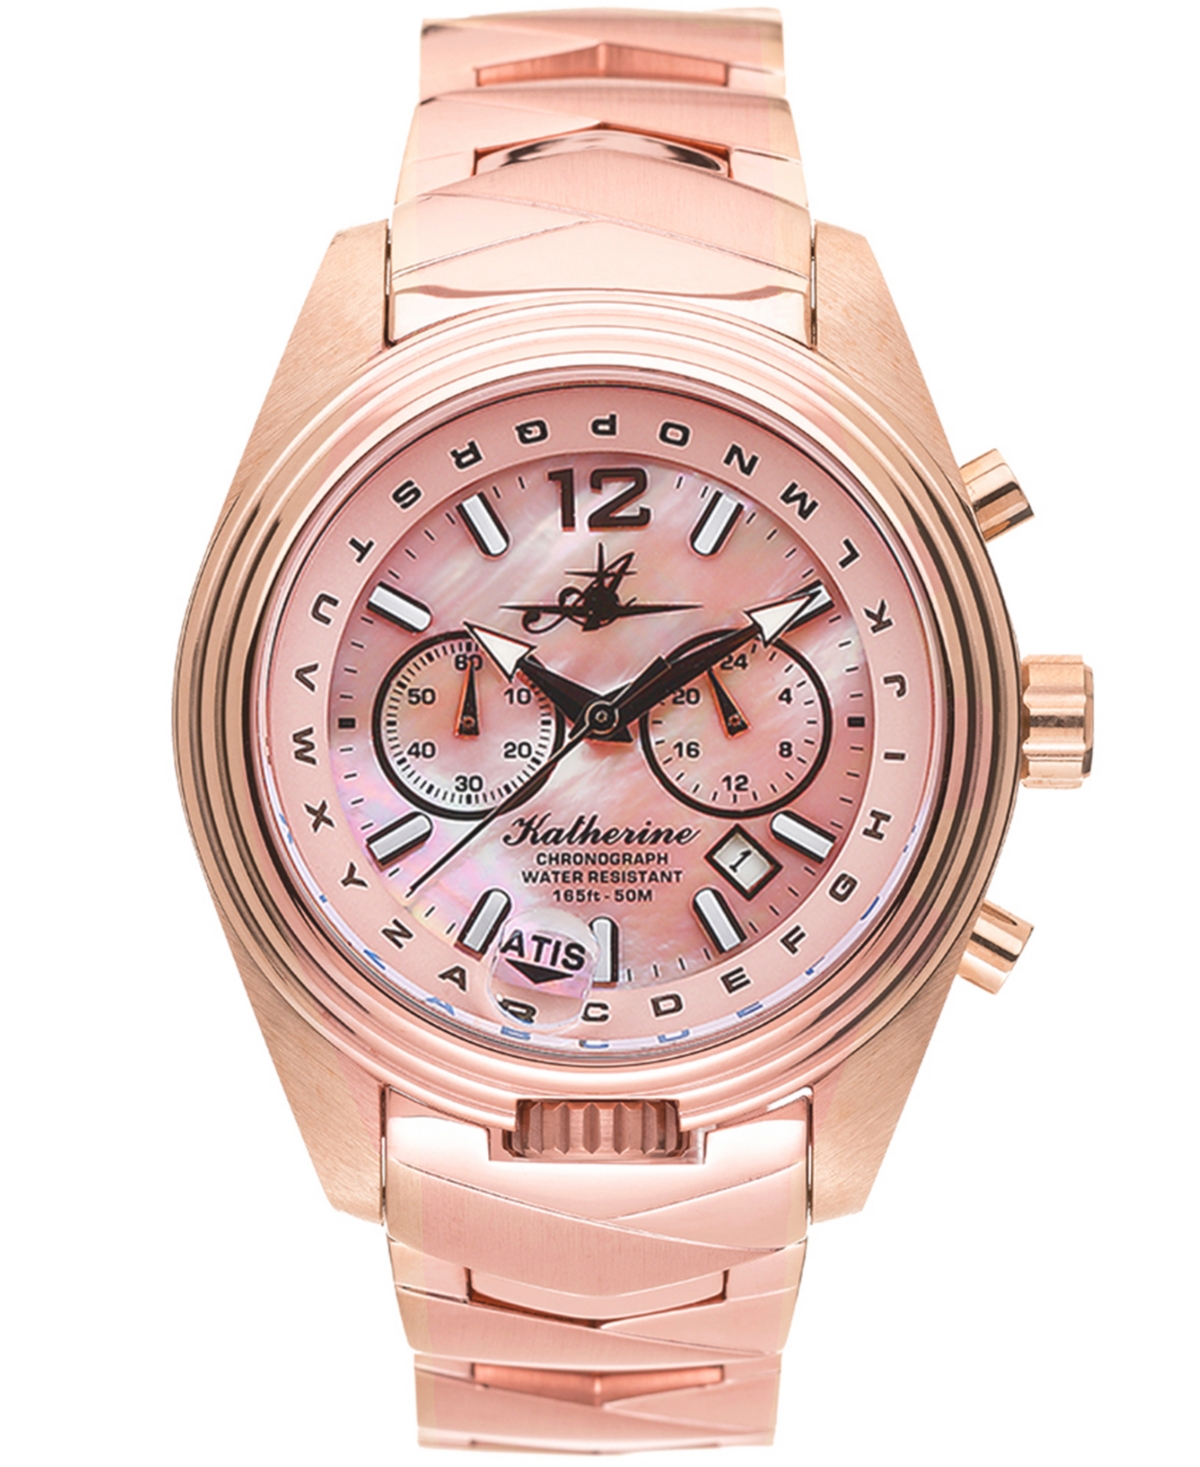 Women's Katherine Chronograph Multifunctional Rose Gold-Tone Stainless Steel Bracelet Watch, 40mm - First Class Rose Gold-Tone